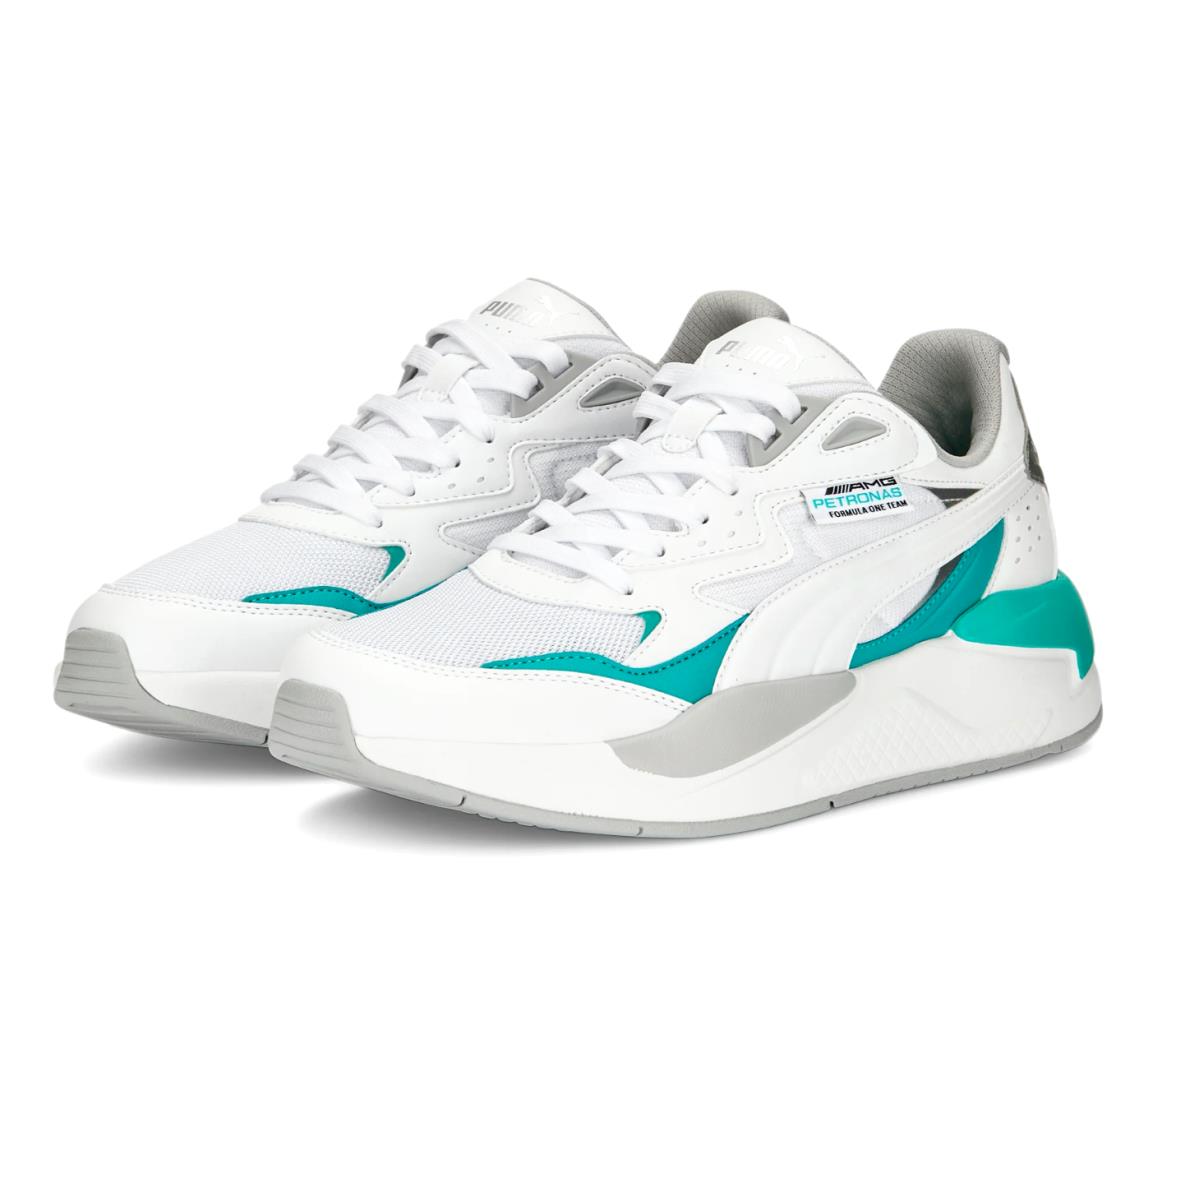 Puma Mercedes Amg X Ray Speed Petronas F1 White Driving Racing Athletic Shoes